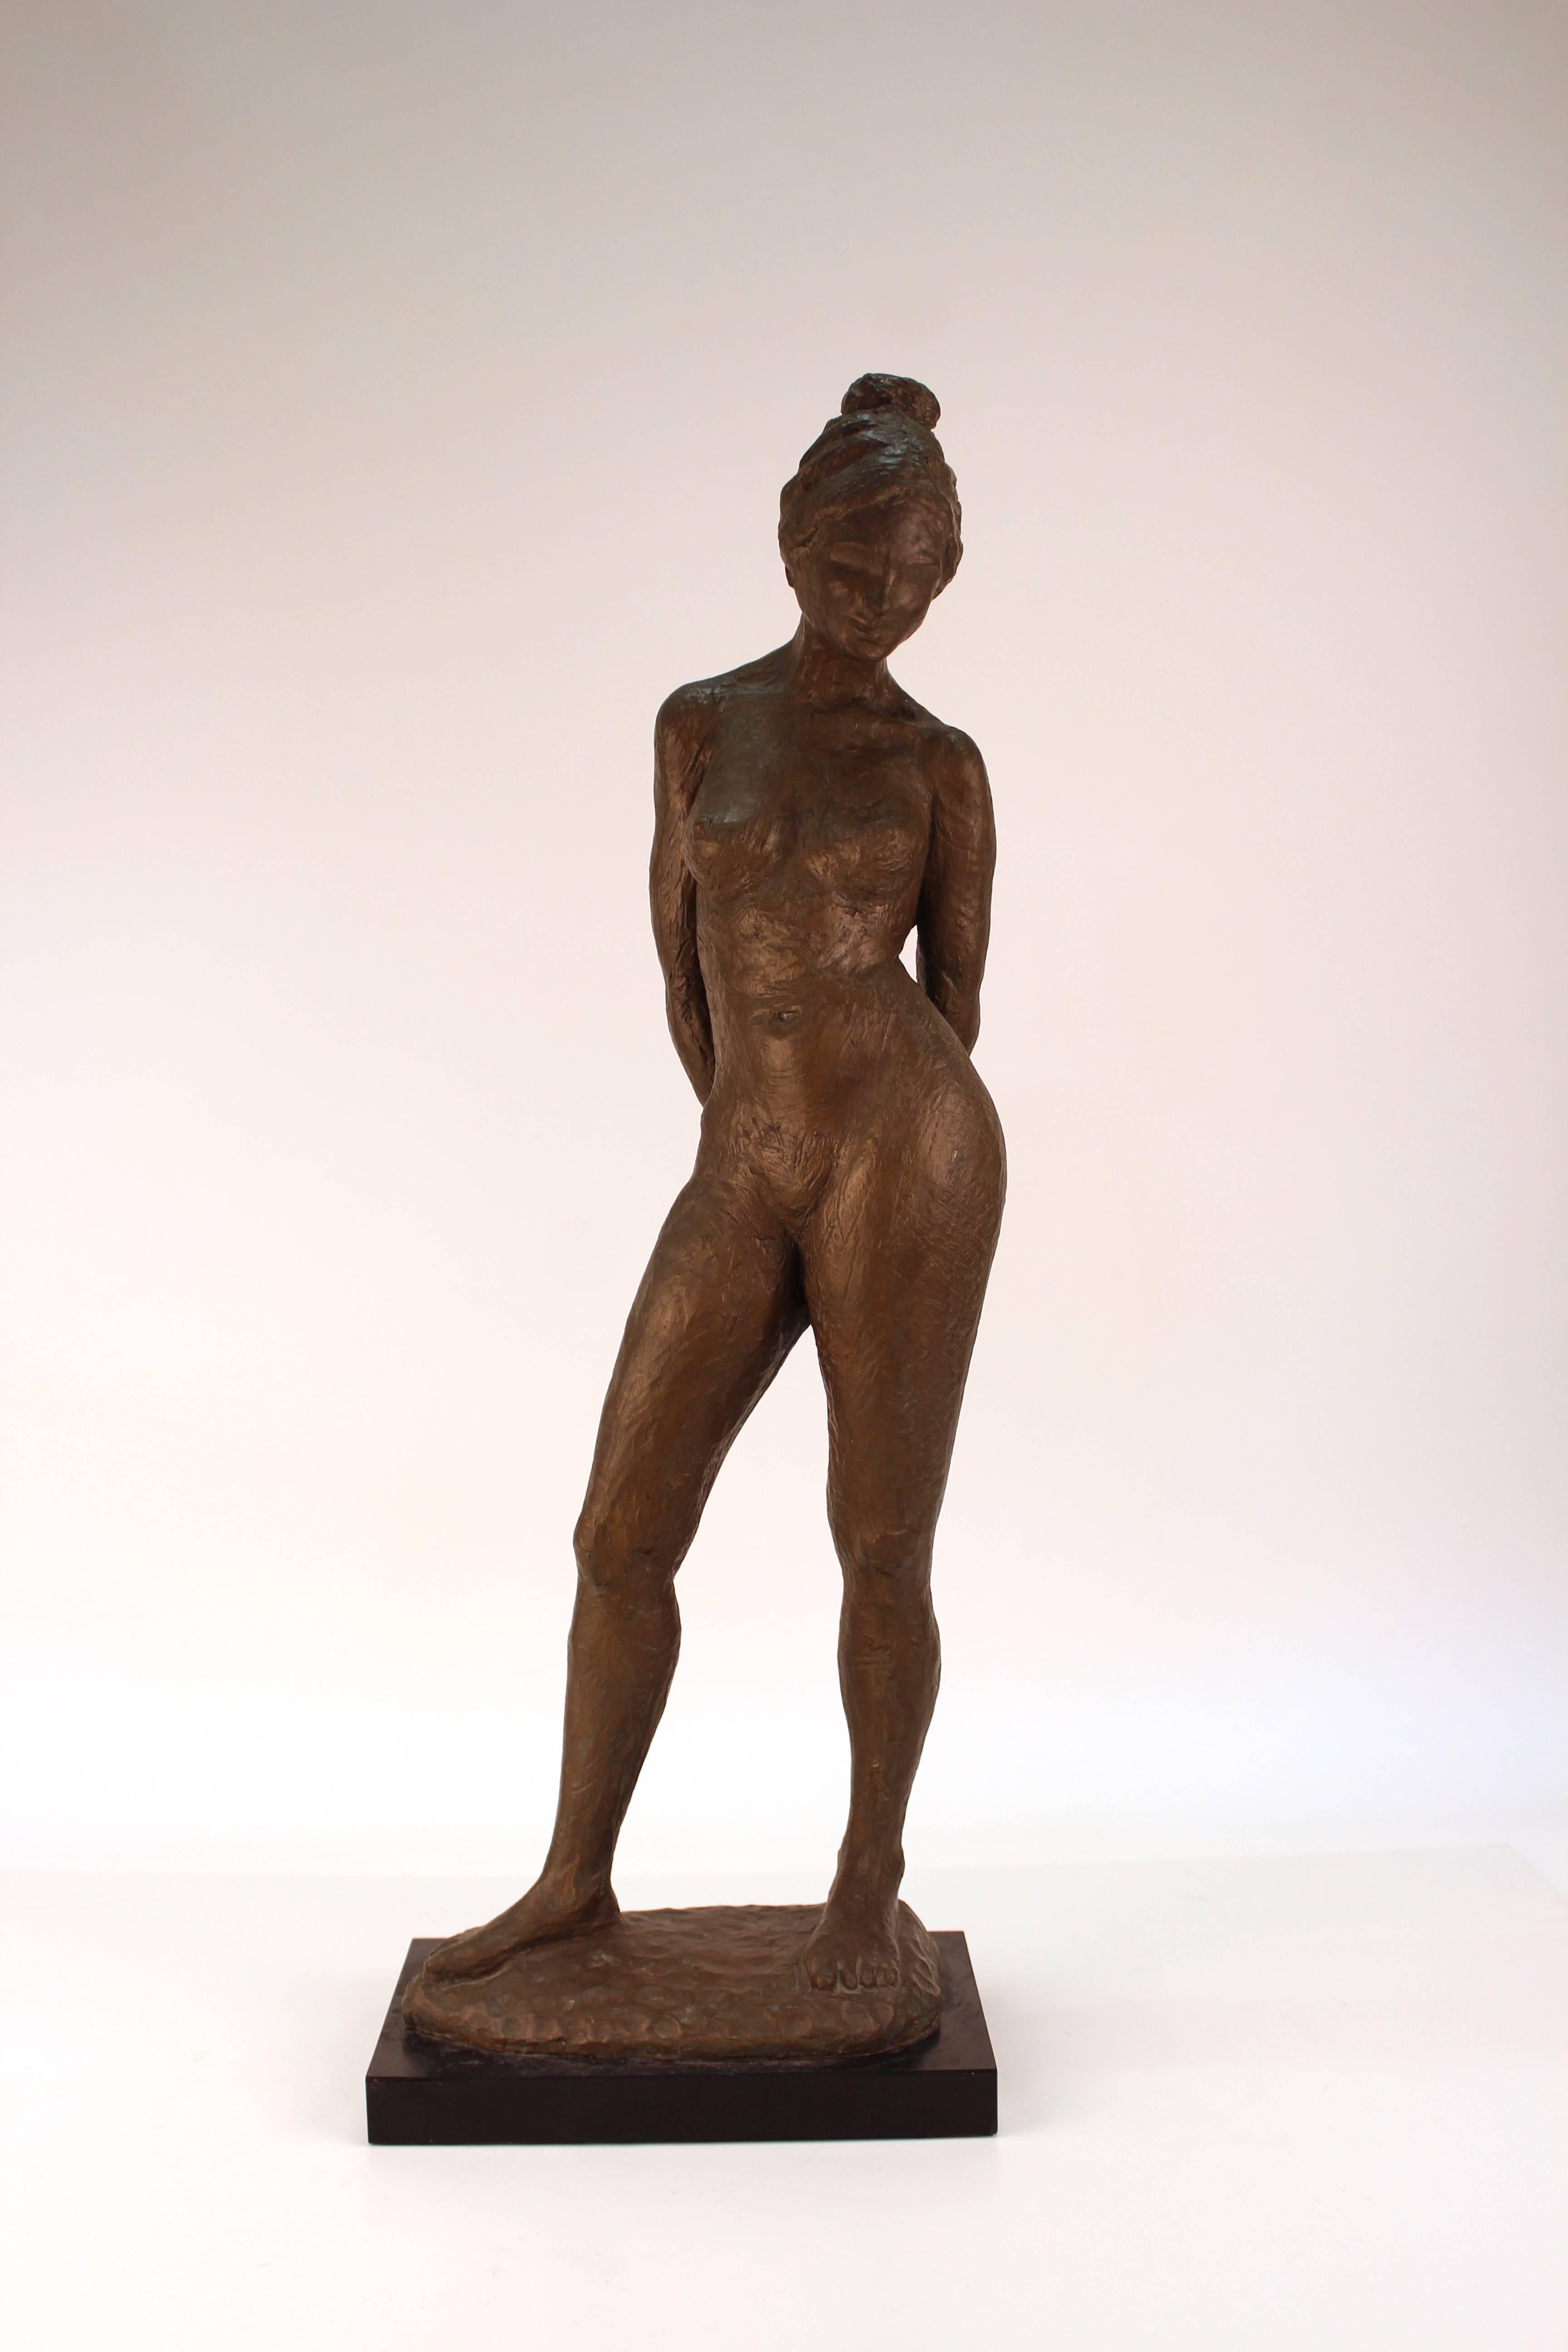 A Mid-Century Modern ceramic sculpture of a nude woman, signed [Herio-Rich '75] on the base. The piece is painted olive green and comes with a black resin base. The piece is in good vintage condition.